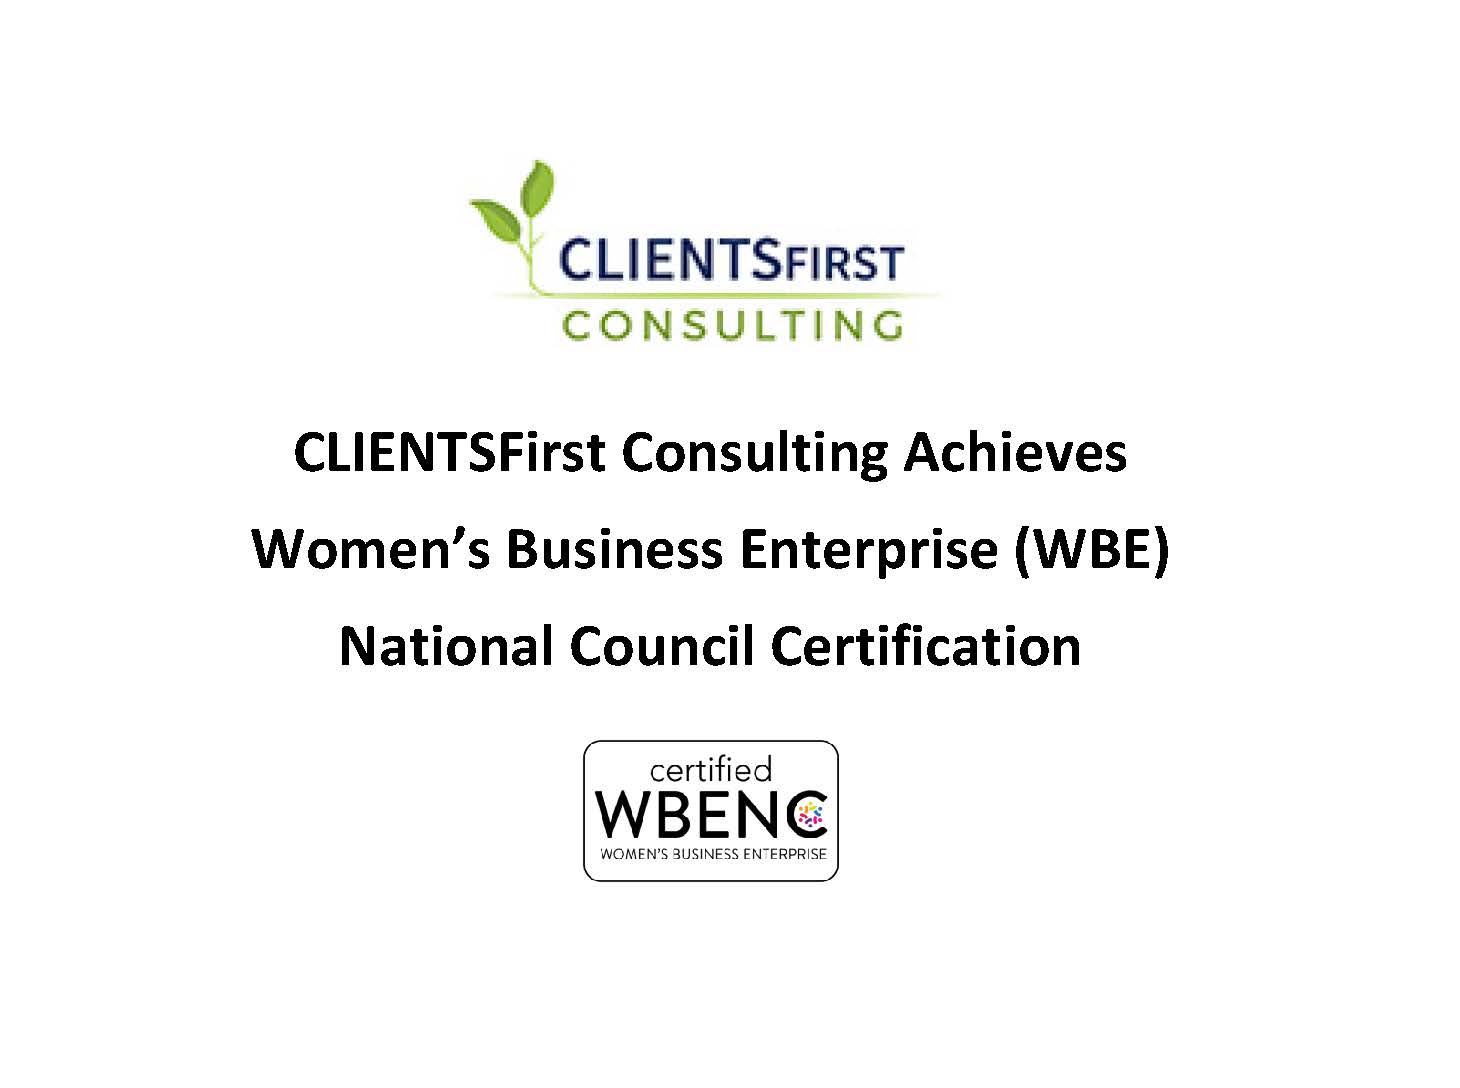 CLIENTSFirst Consulting Achieves Women’s Business Enterprise National Council Certification